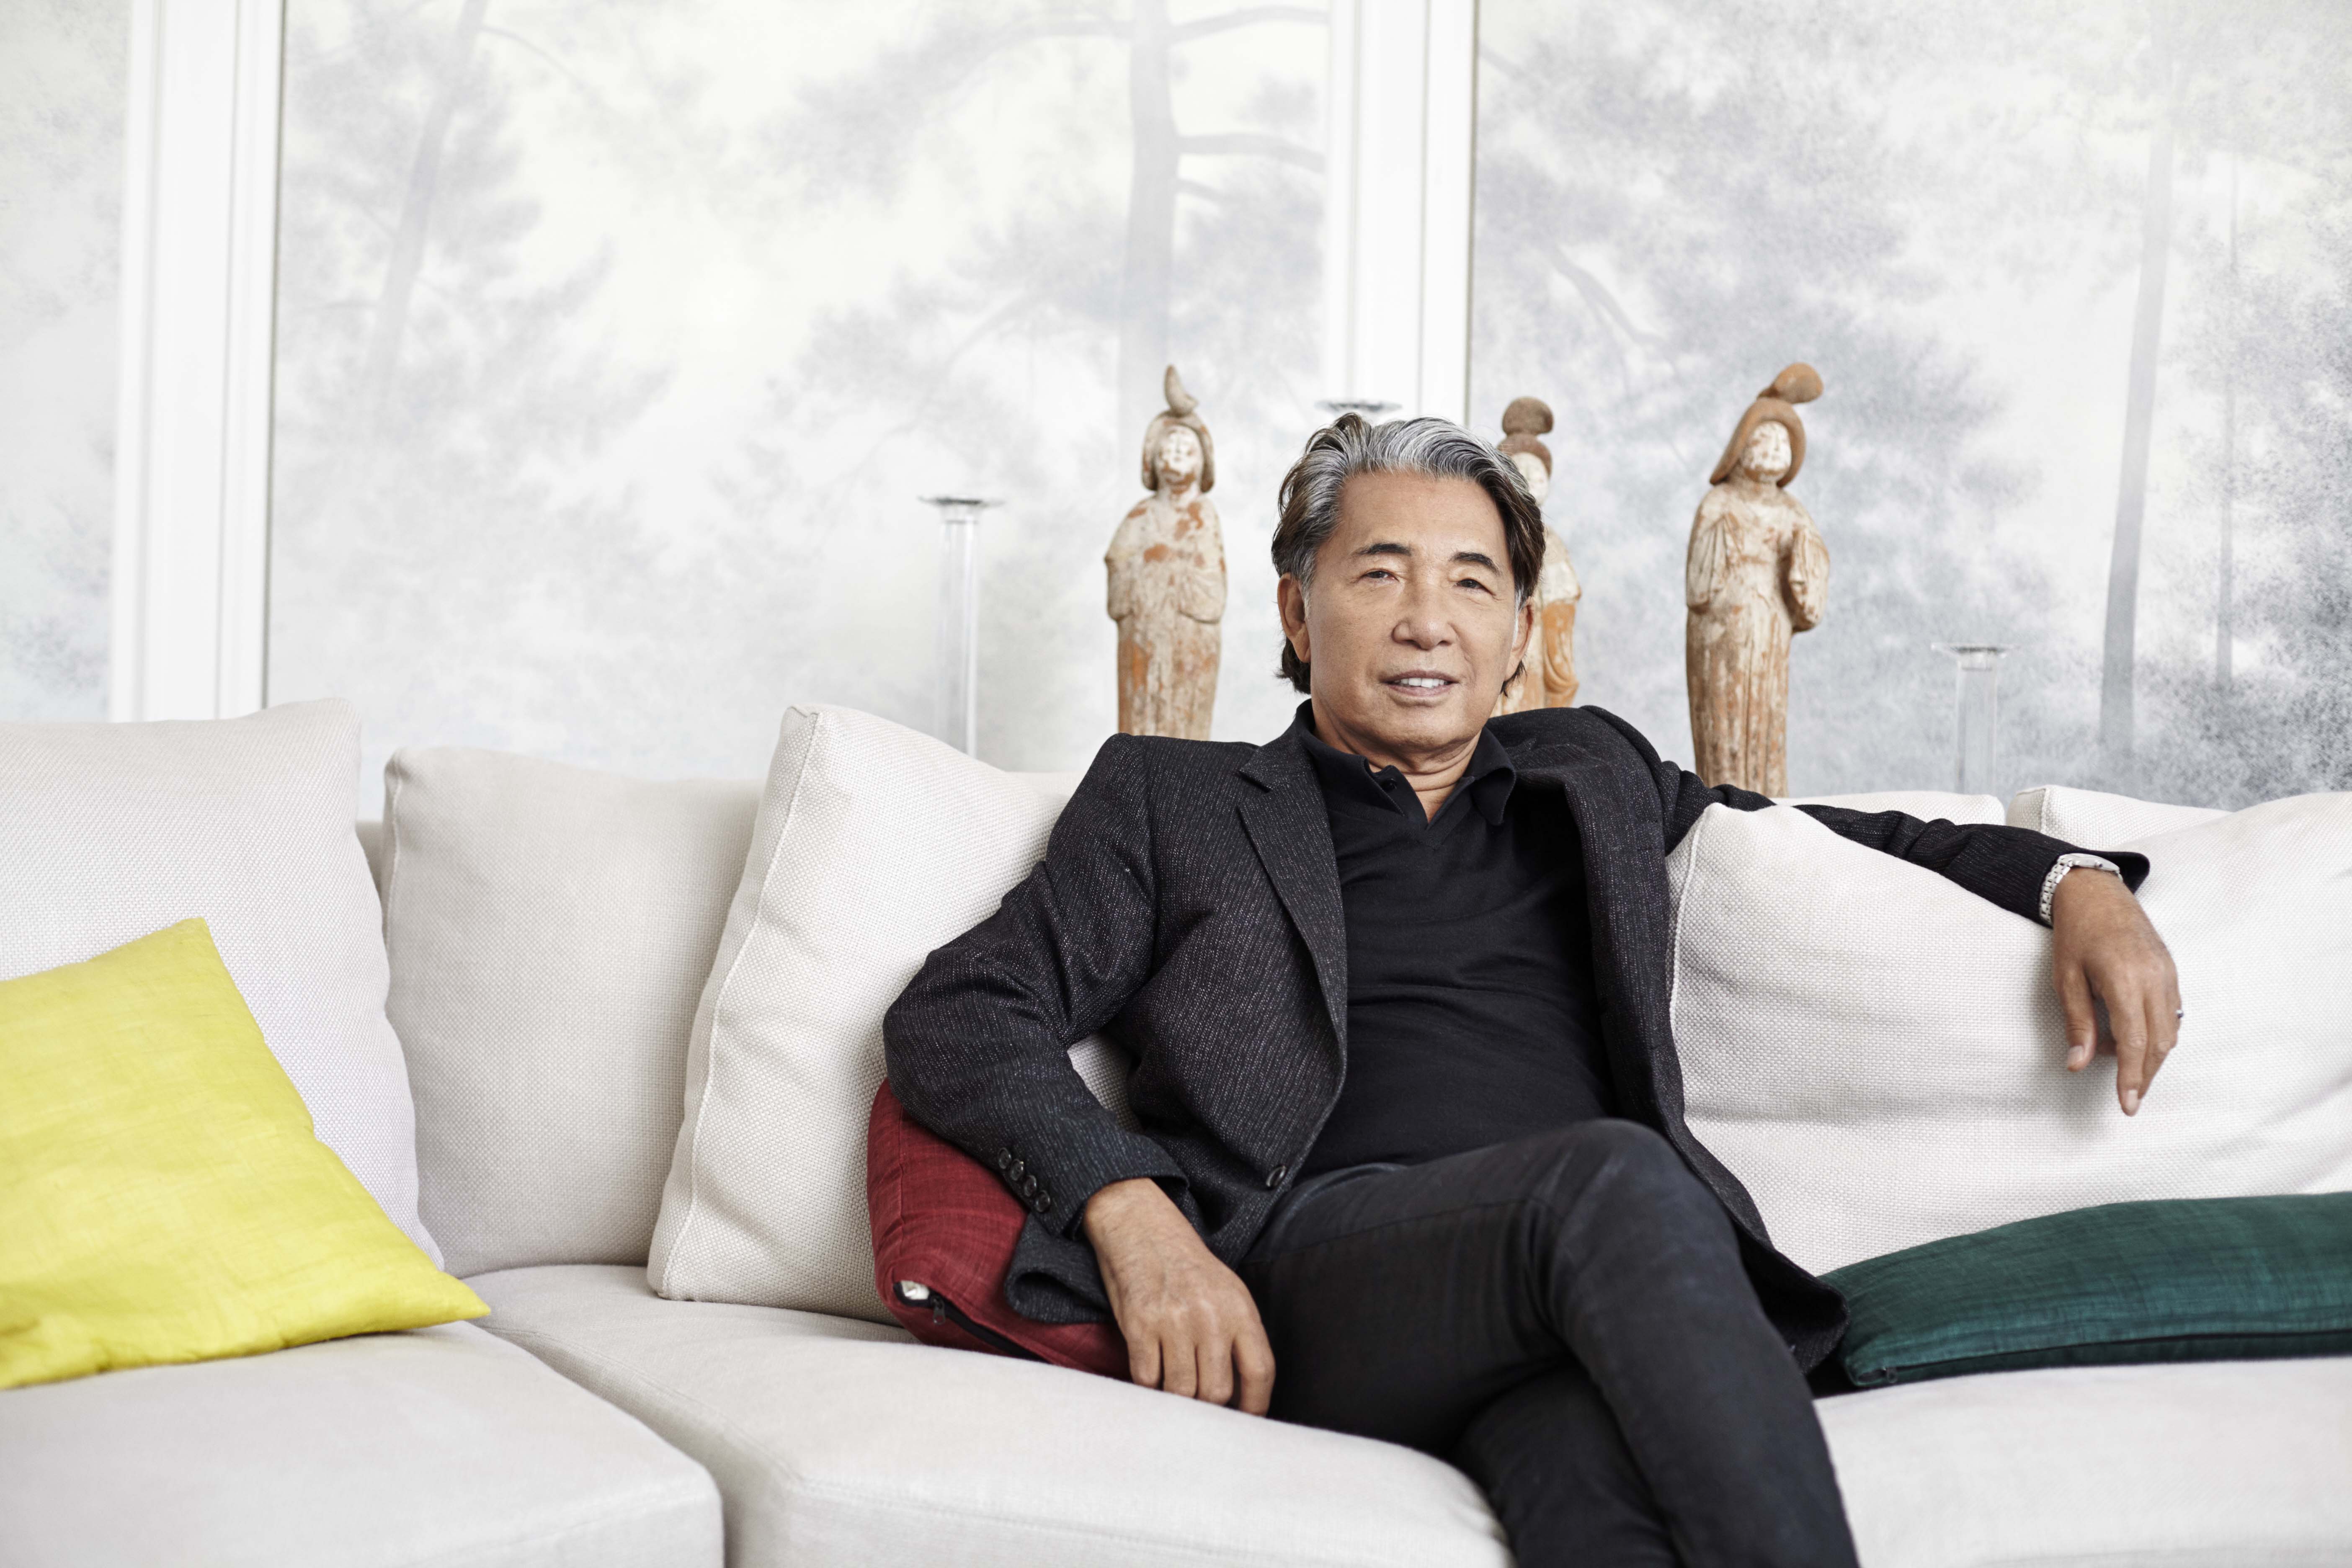 Kenzo Takada "Was The Epitome of the Art Of Living"